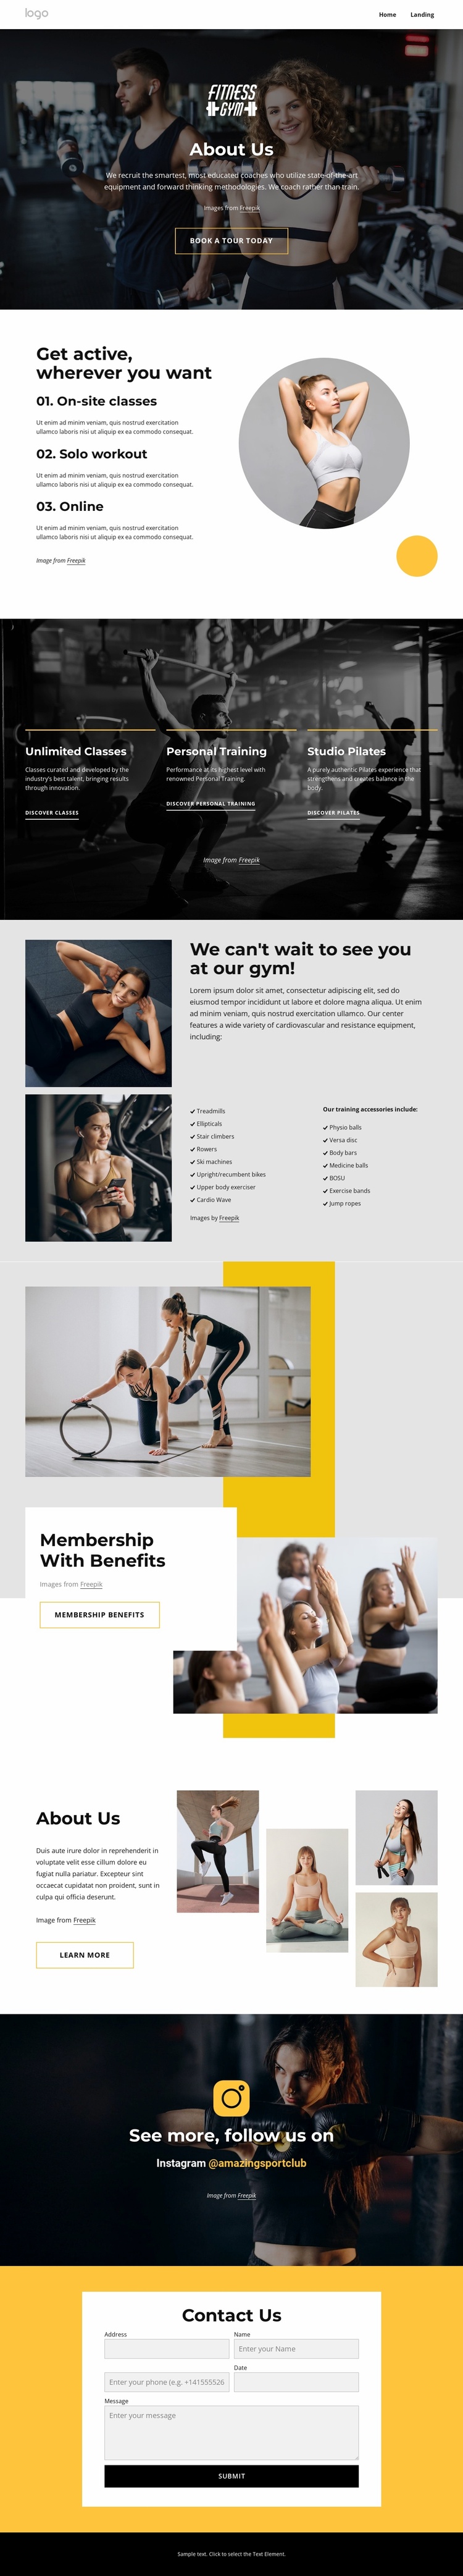 Sport and wellness center Landing Page